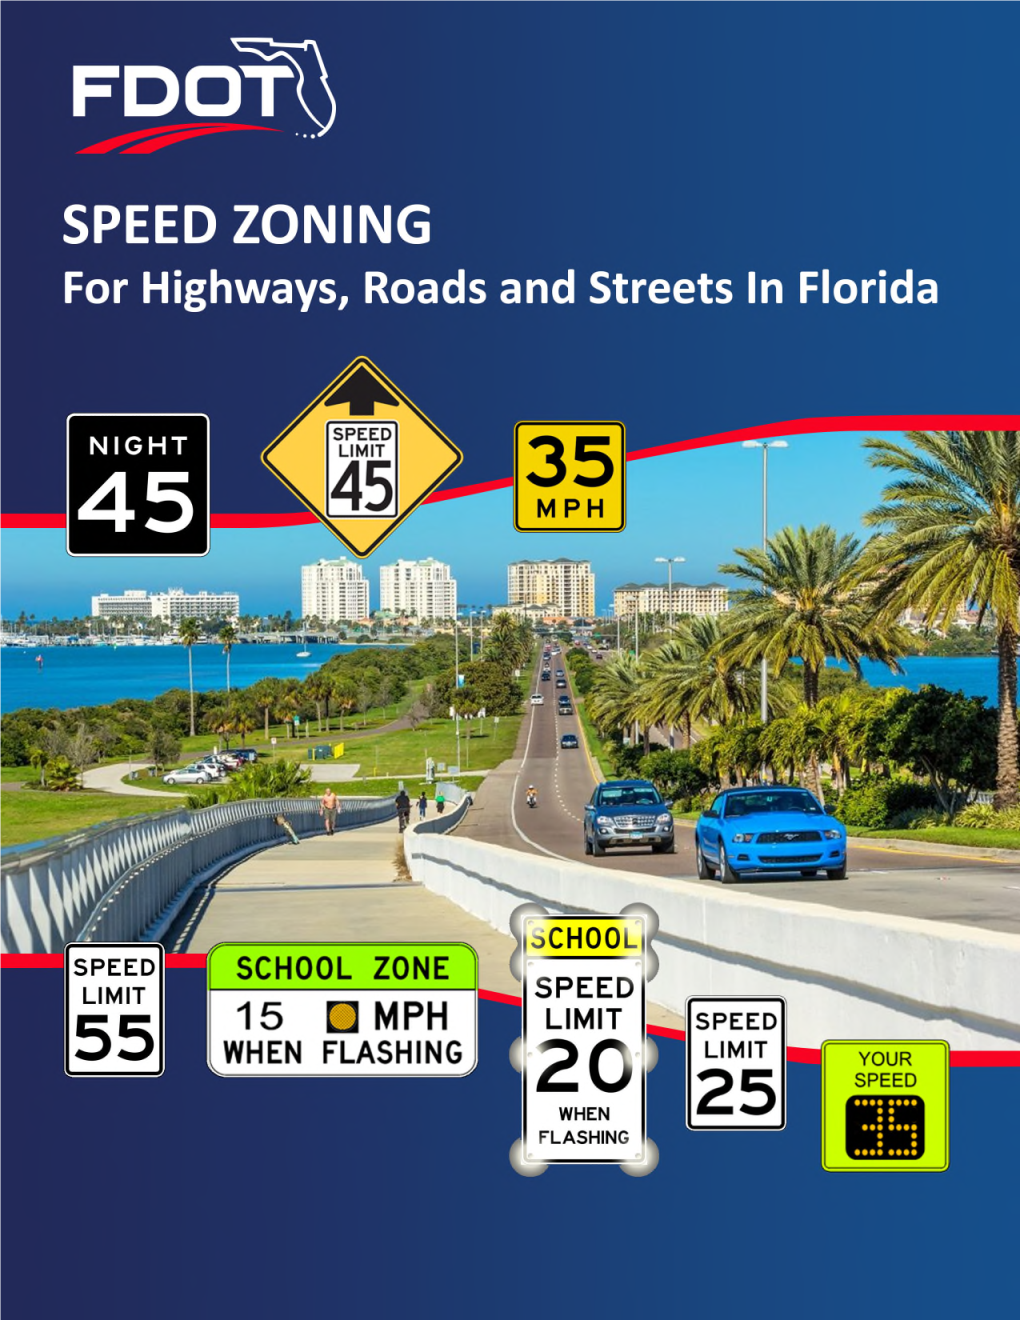 Speed Zoning for Highways, Roads, and Streets in Florida